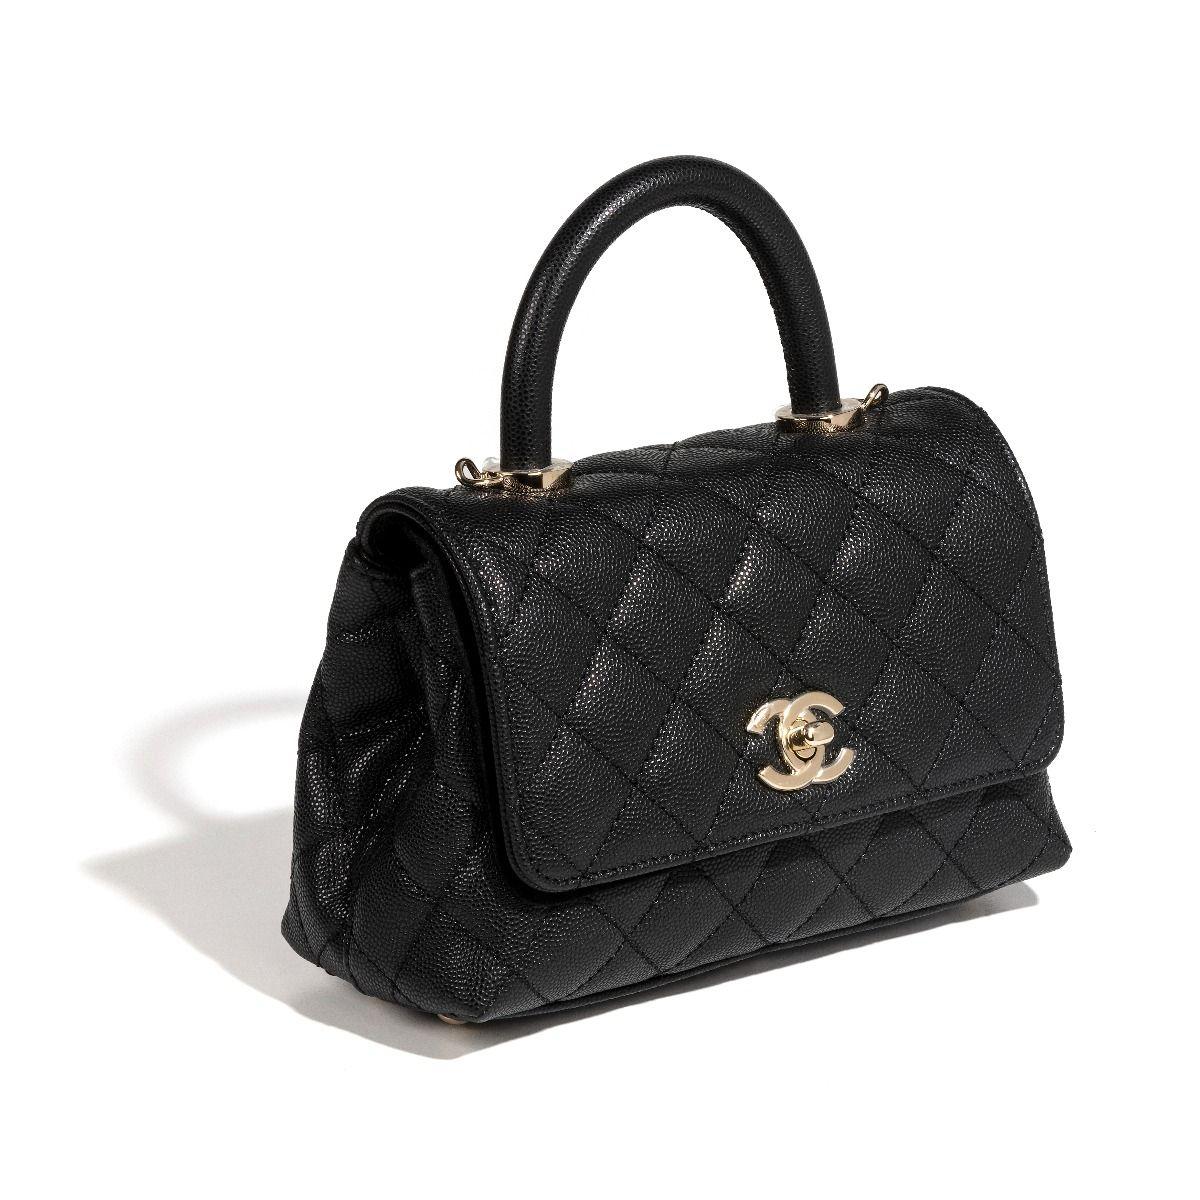 Featuring Chanel's signature diamond quilting, this pre-owned vintage top handle handbag has been crafted from caviar leather. Finished with gold-toned hardware, the backpack features the Maisons signature interlocking CC logo.
* Please note that